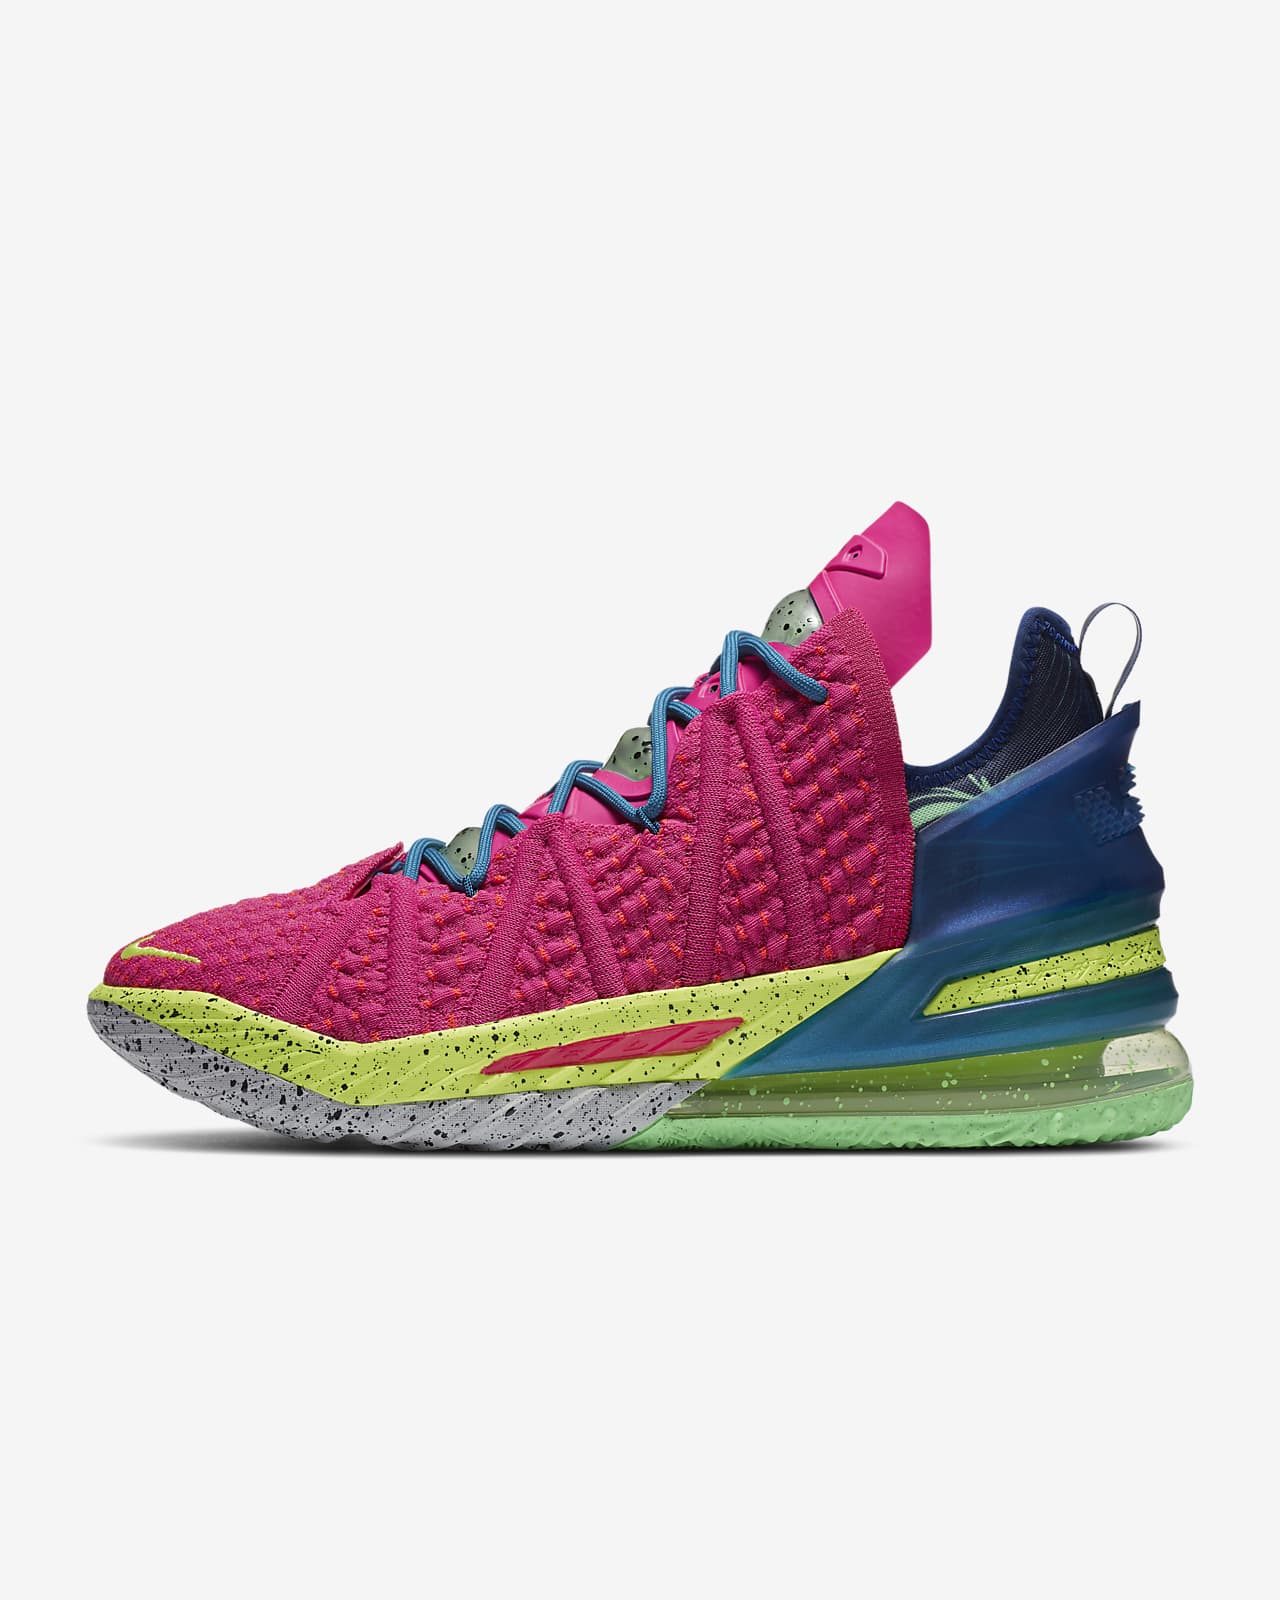 kyrie 5 irving